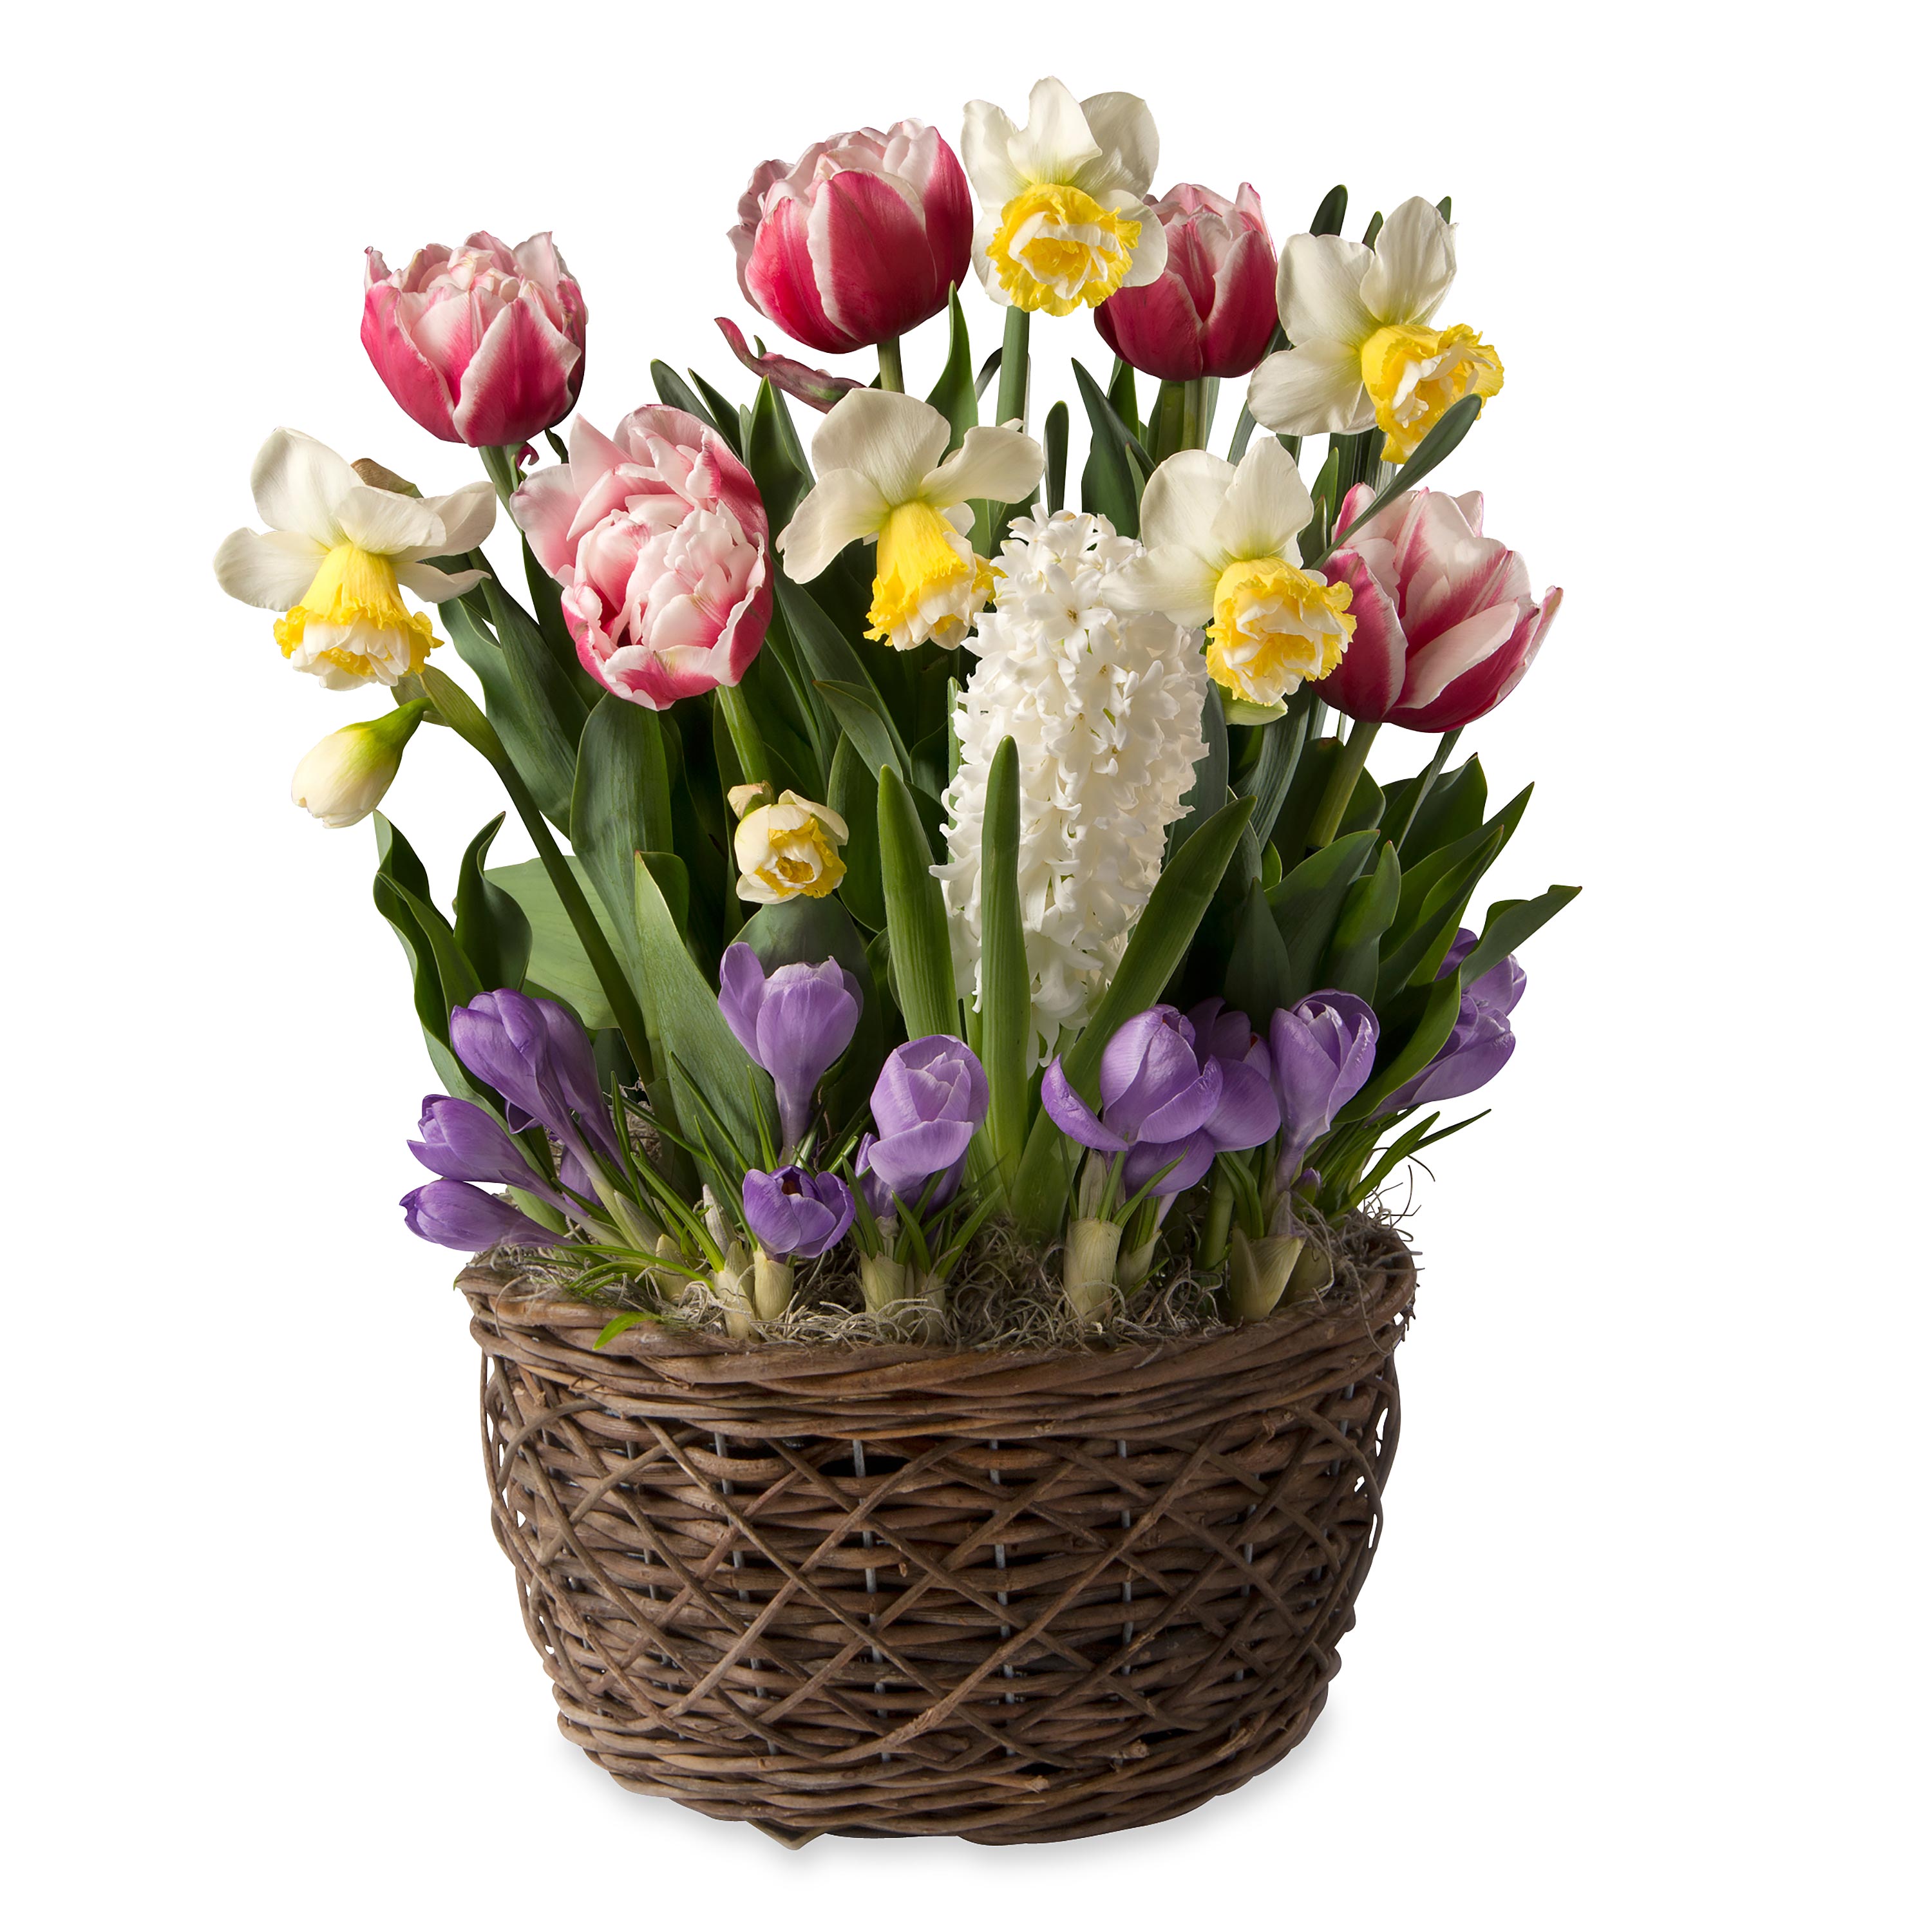 Narcissus, Tulips, Crocus, Hyacinth Flower Bulb Gift Garden - Ships January-May